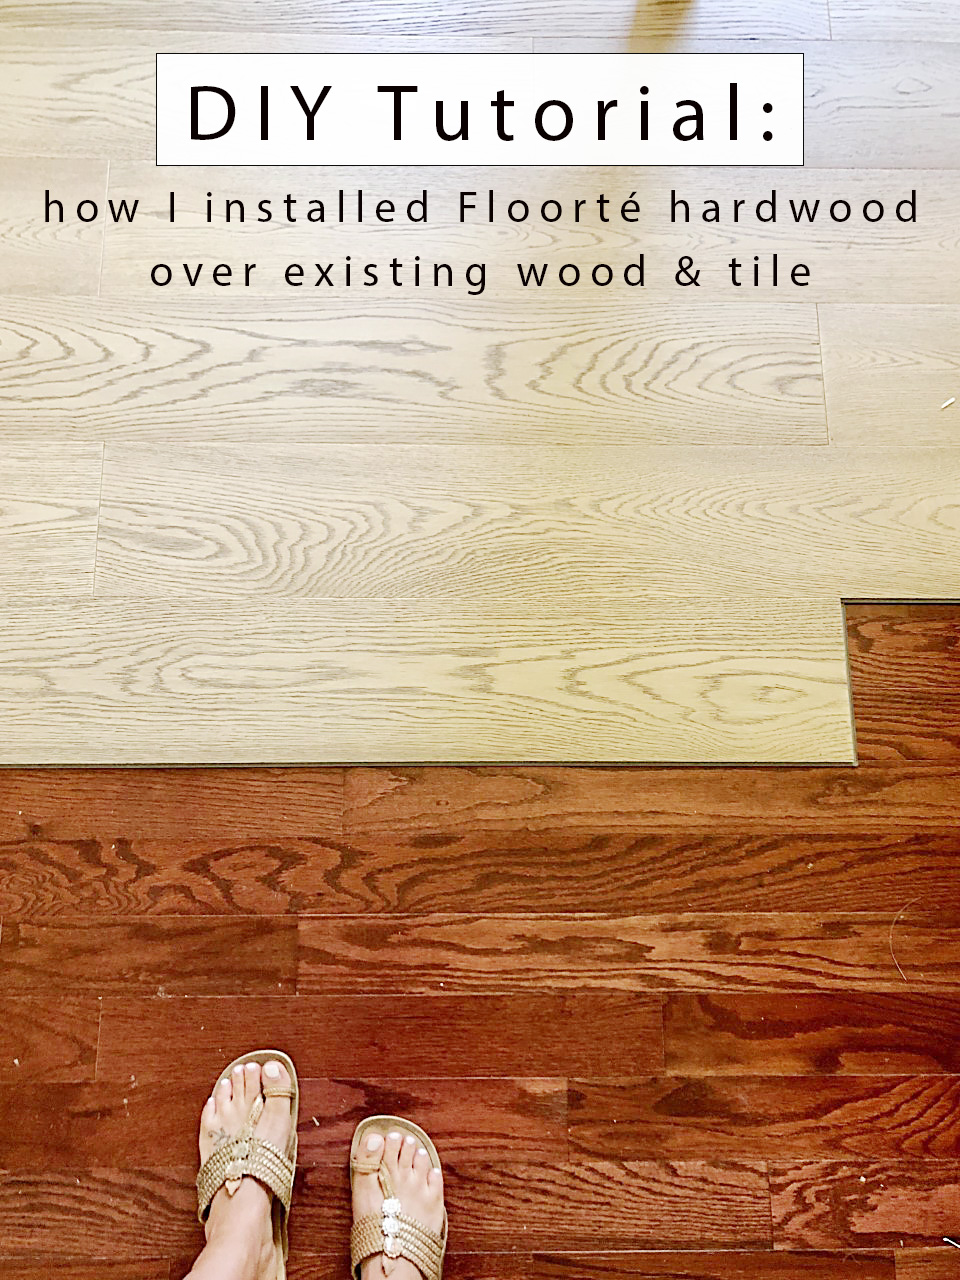 How To Install Floating Hardwood, How To Add Hardwood Existing Floor